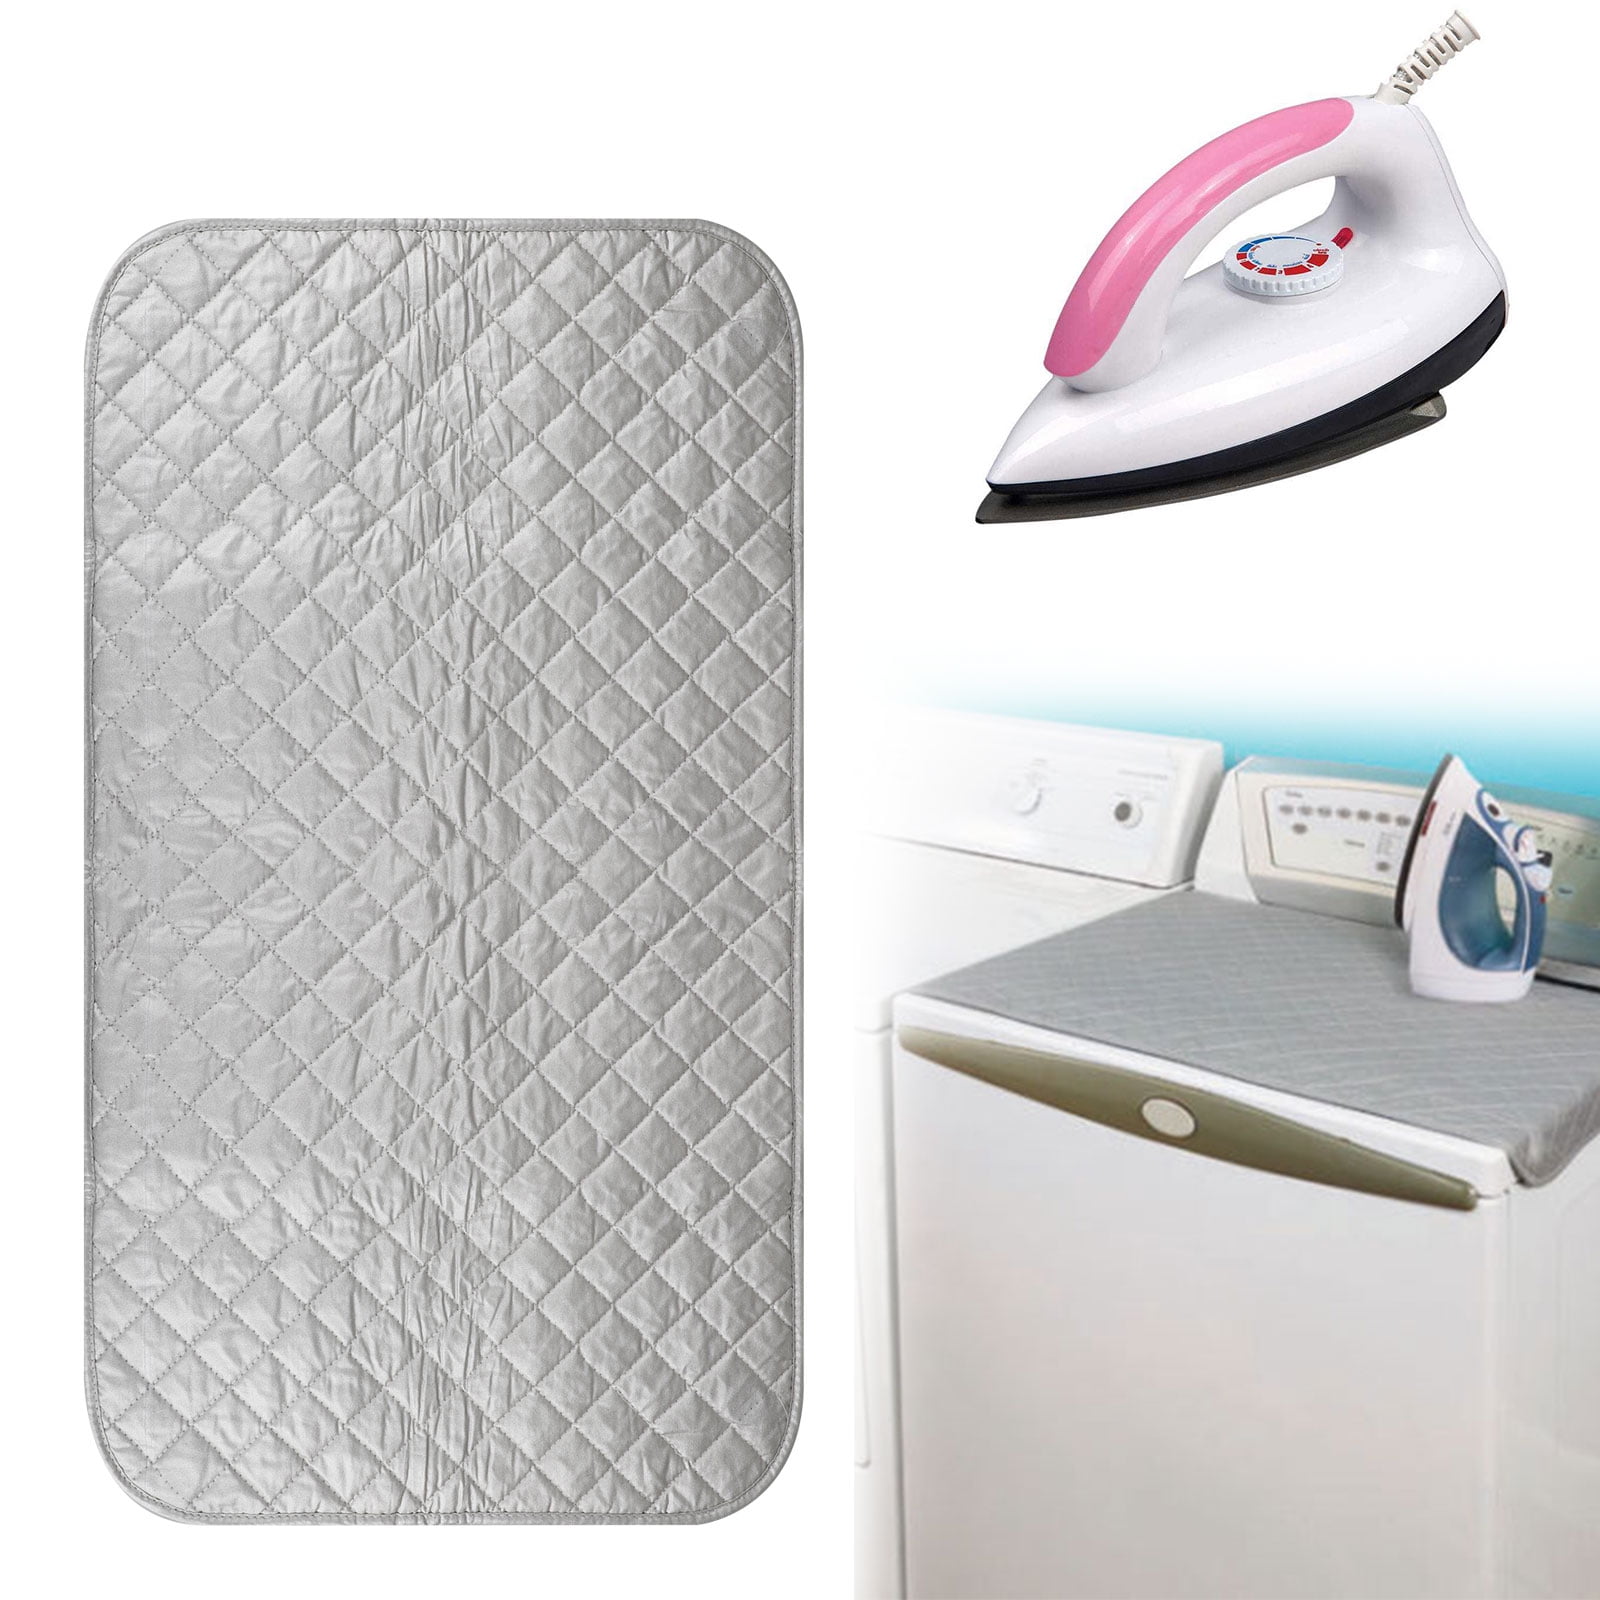 Ironing Pad, Portable Foldable Anti-Slip Magnetic Travel Ironing Pad Mat  Blanket Ironing Pad Cover for Washer/Dryer/Table Top/Countertop/Small  Ironing